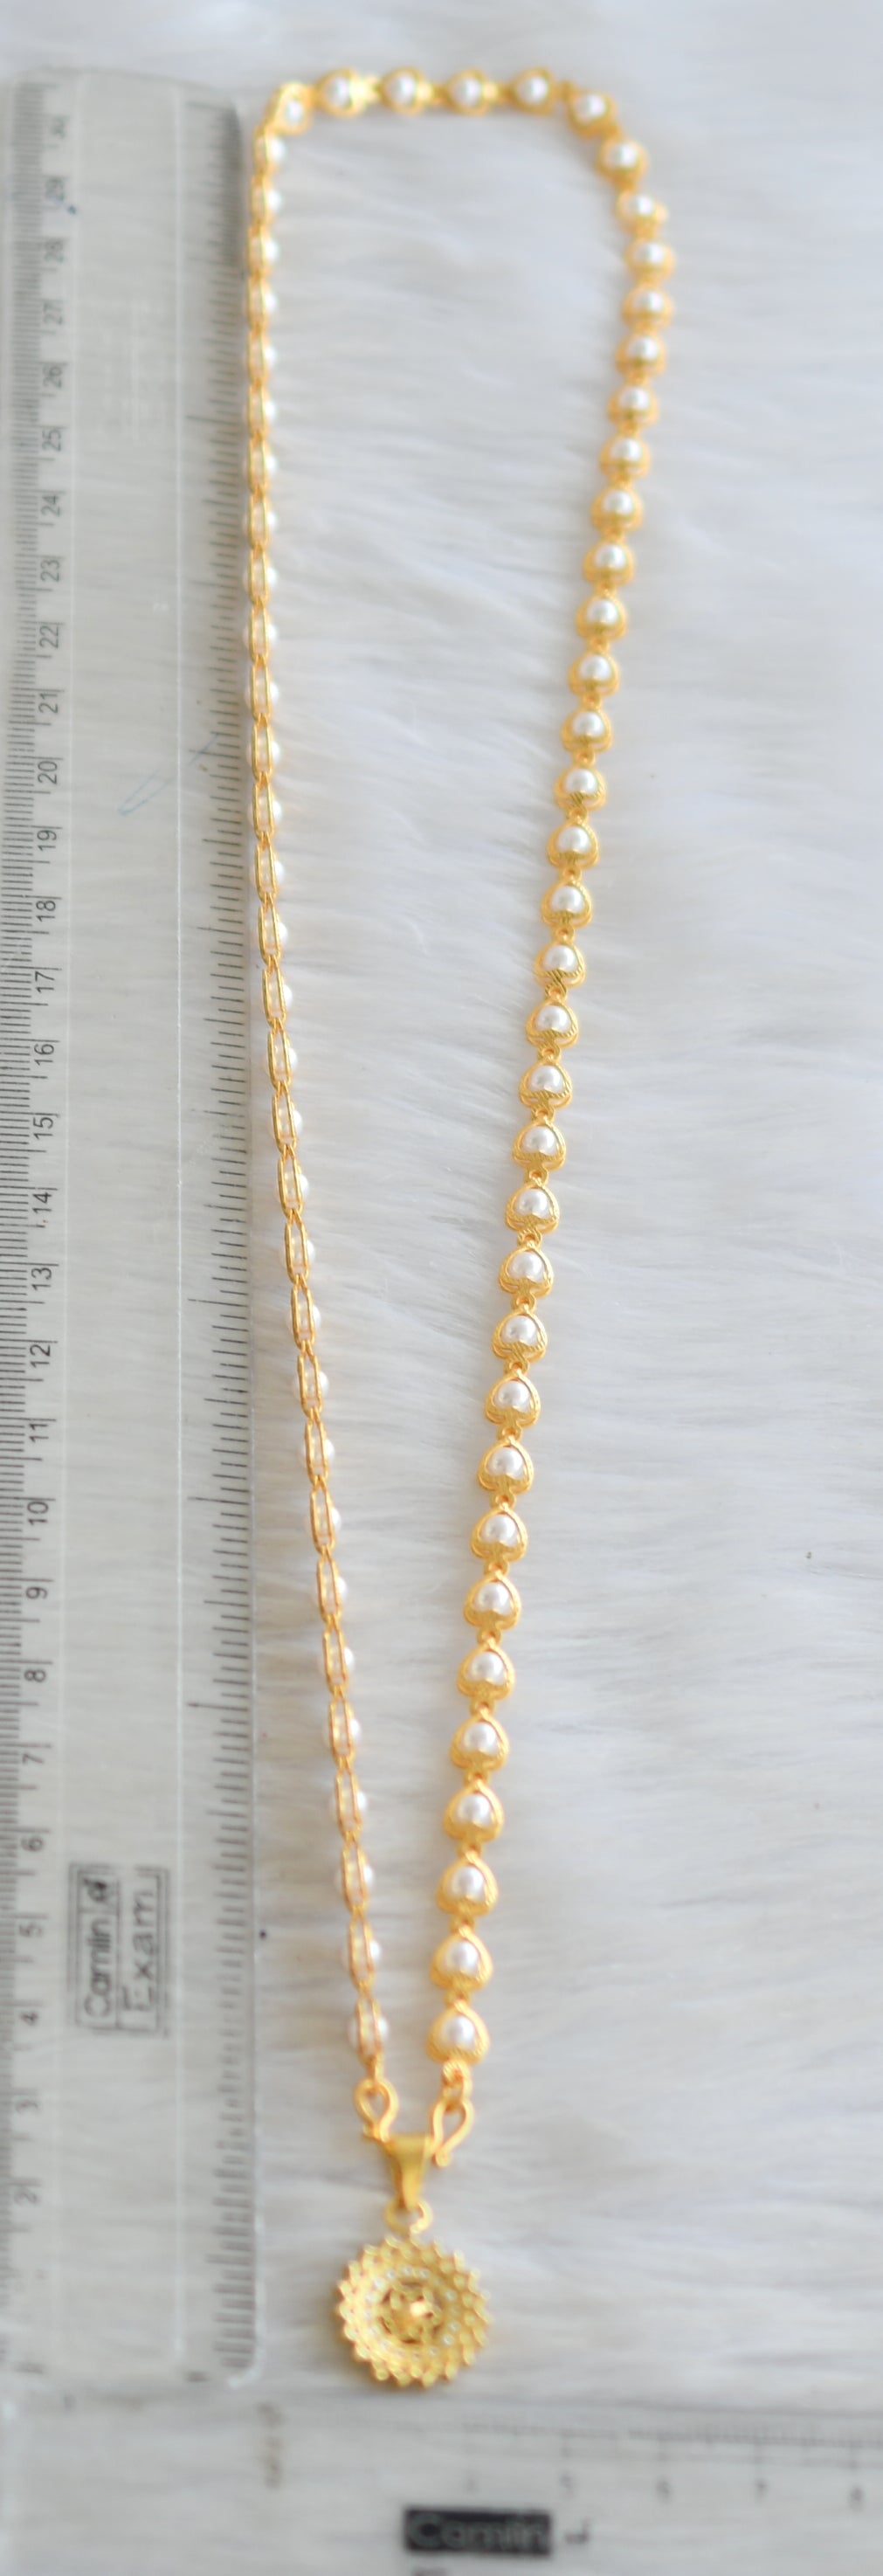 Gold tone pearl chain with pendant dj-41610